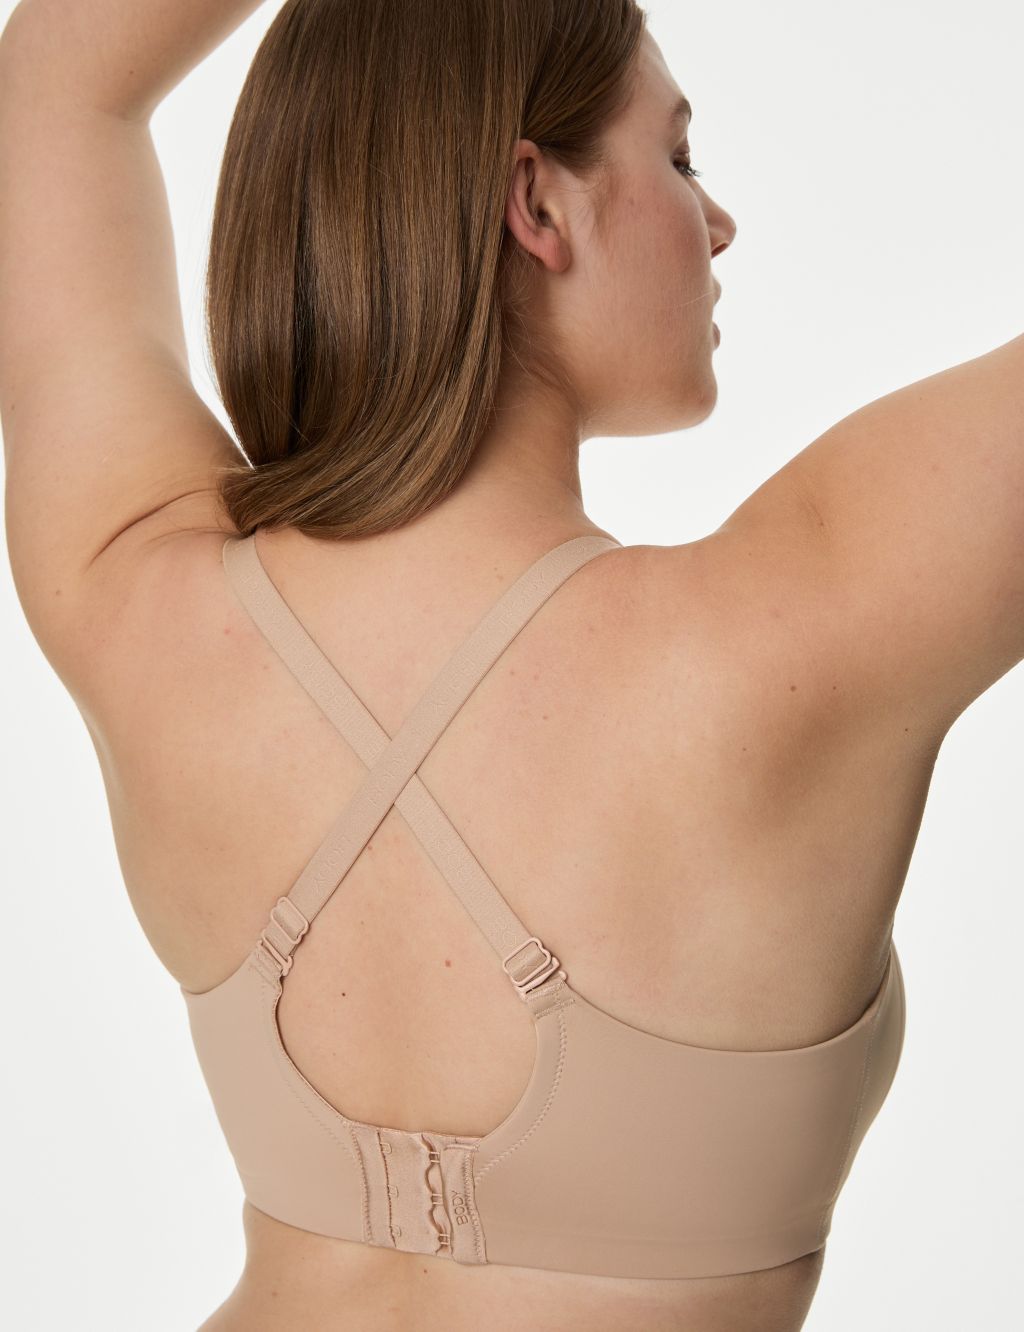 Flexifit™ Non-Wired Full Cup Bra F-H 8 of 8